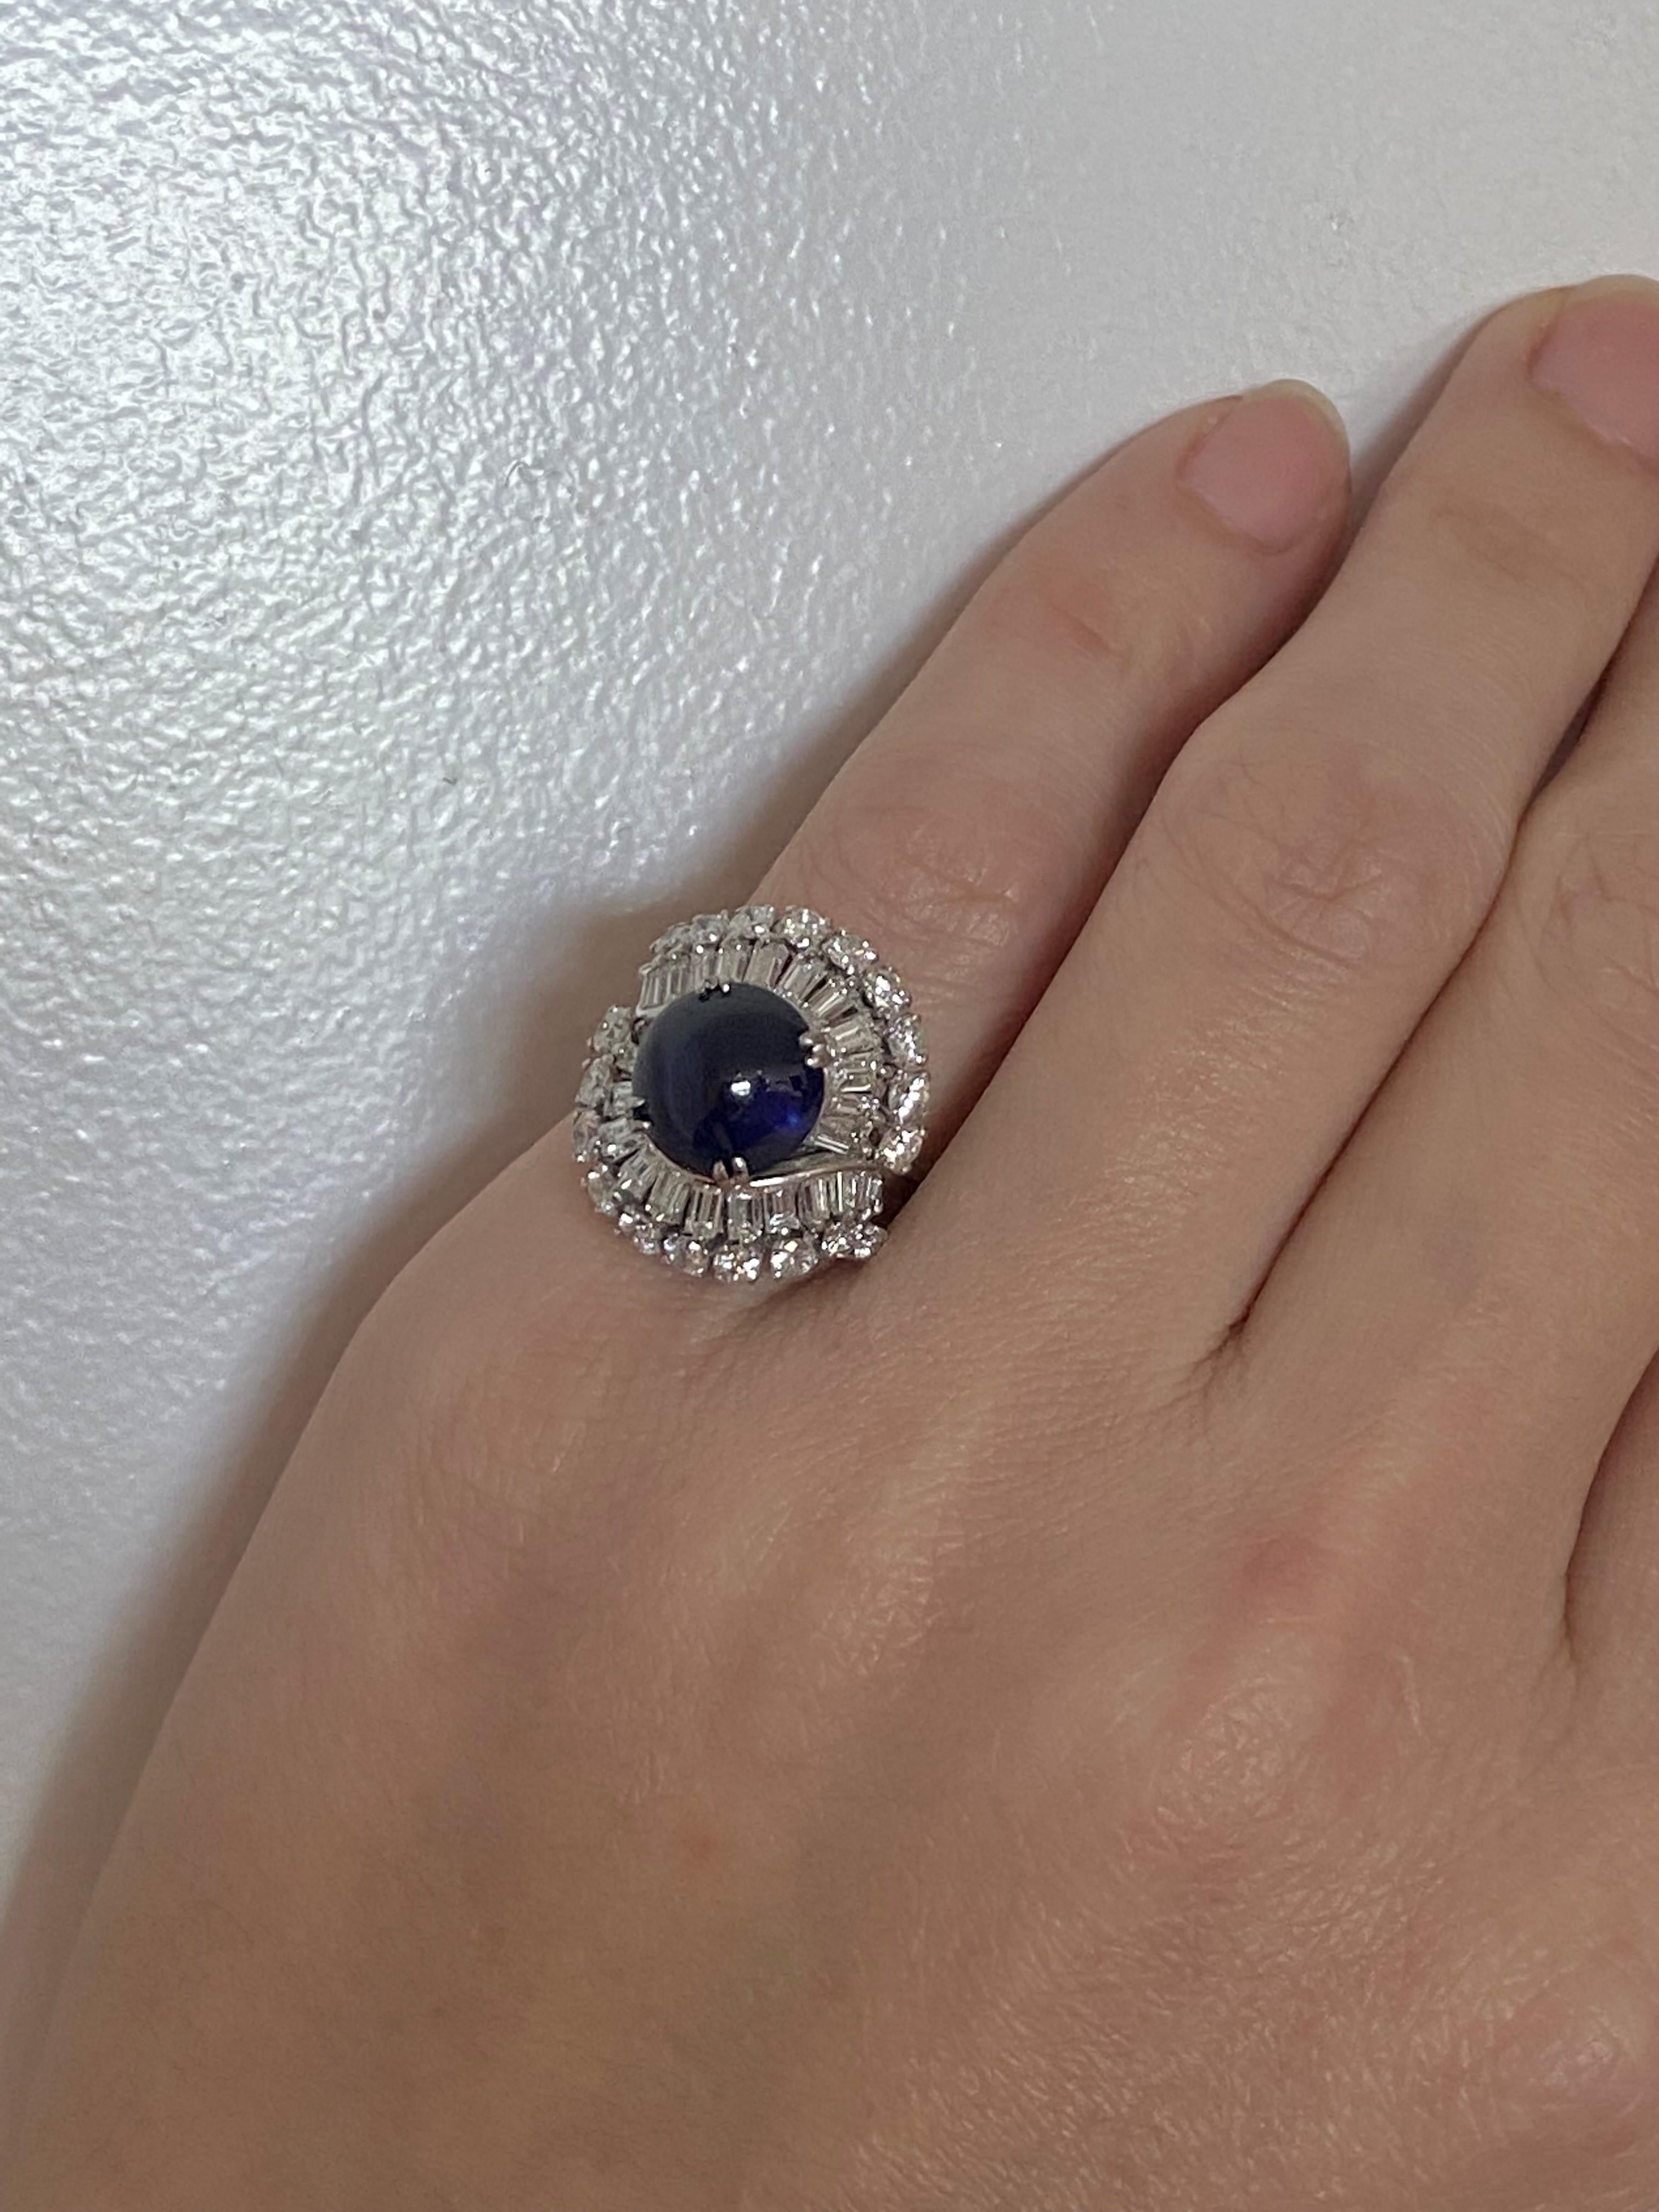 Art Deco 1930 Gia Certified Platinum Cocktail Ring With 8.07 Ctw Pailin Sapphire 2